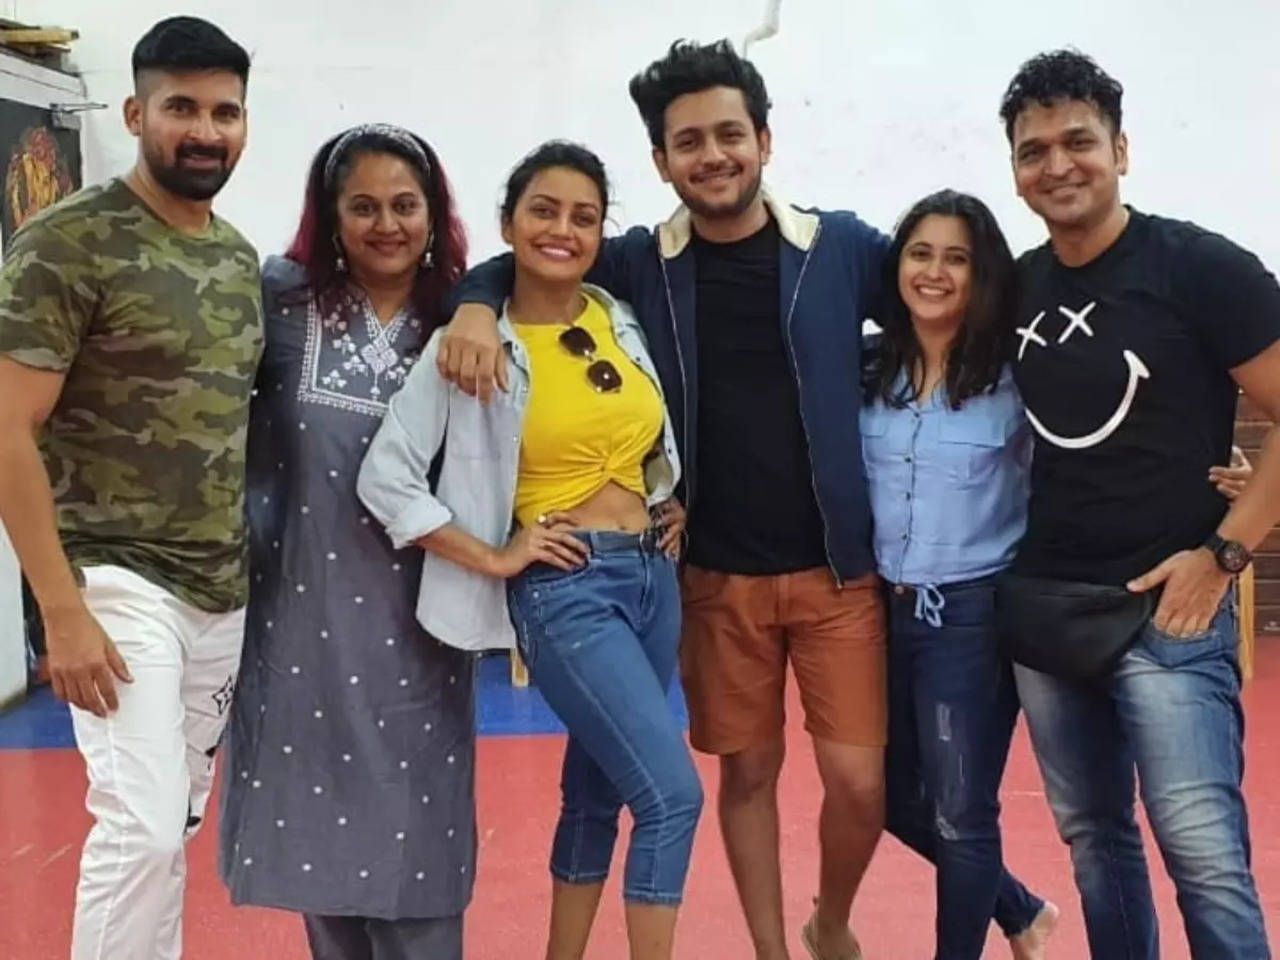 Bigg Boss Marathi 3 Grand Finale: Former contestants Sonali Patil, Akshay Waghmare, Mira Jagganath, and Adish Vaidya to entertain in the star-studded - Times of India